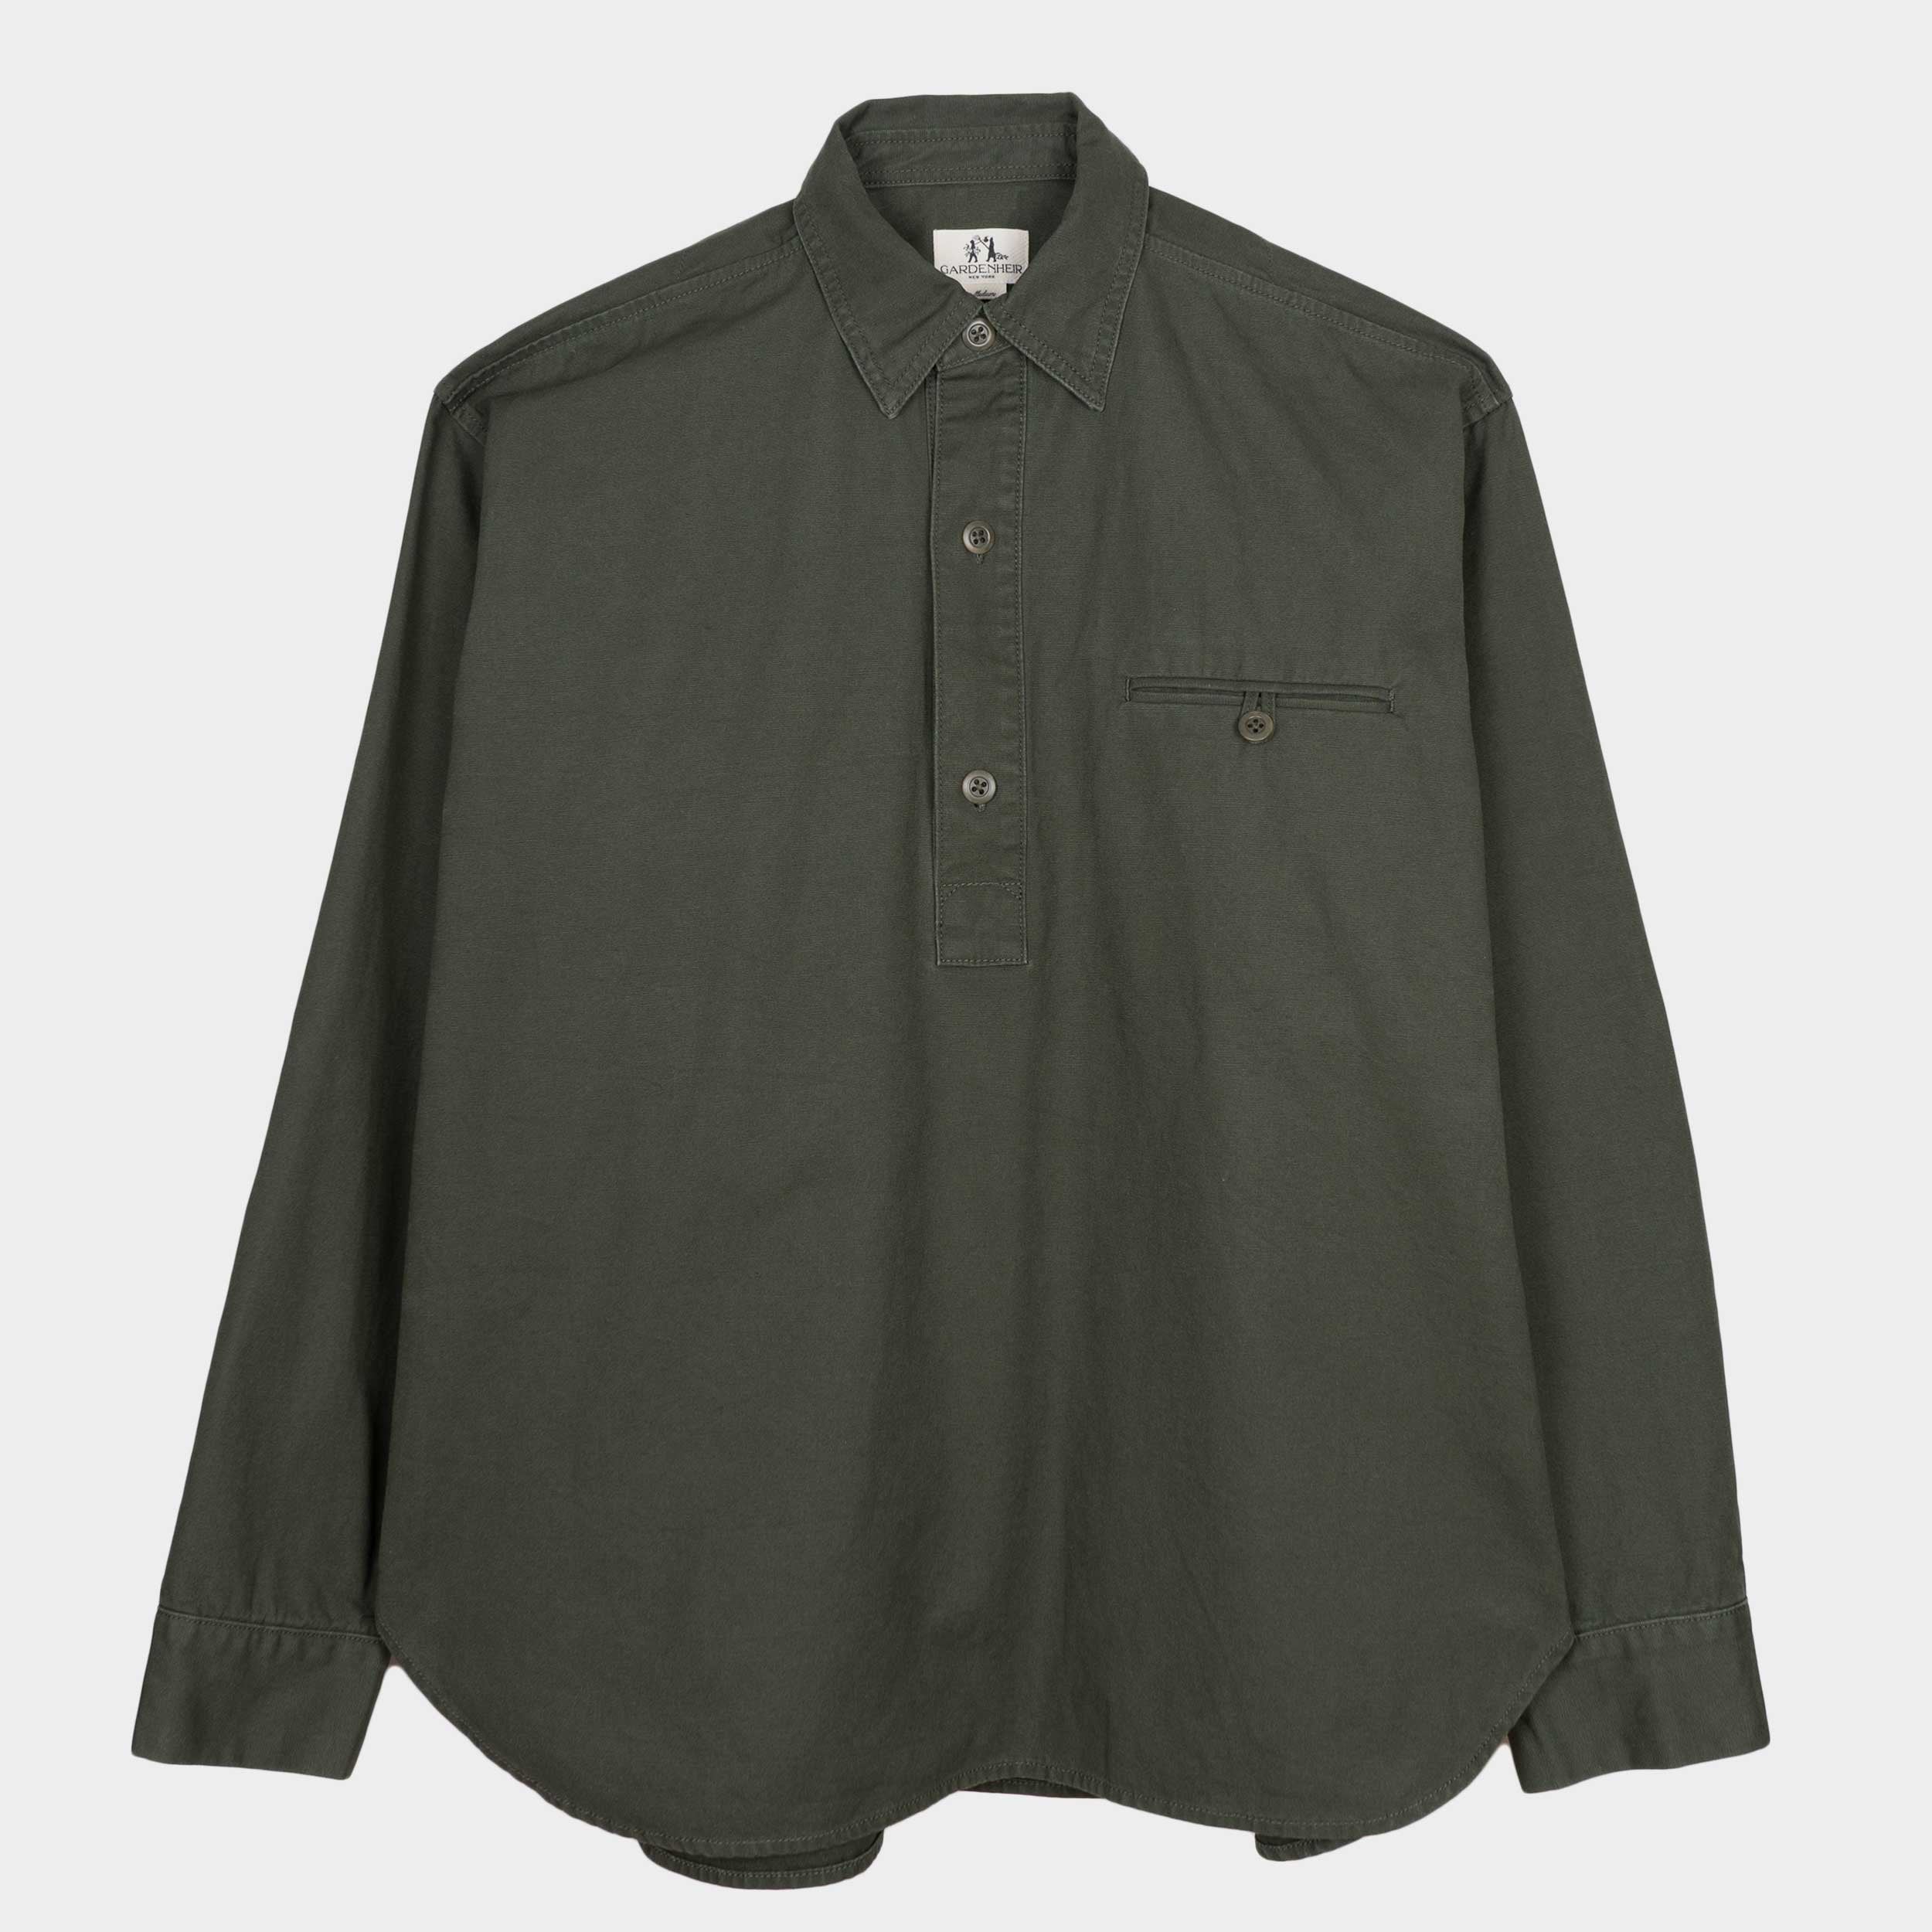 Washed Cotton Gardening Smock No. 2 in Olive